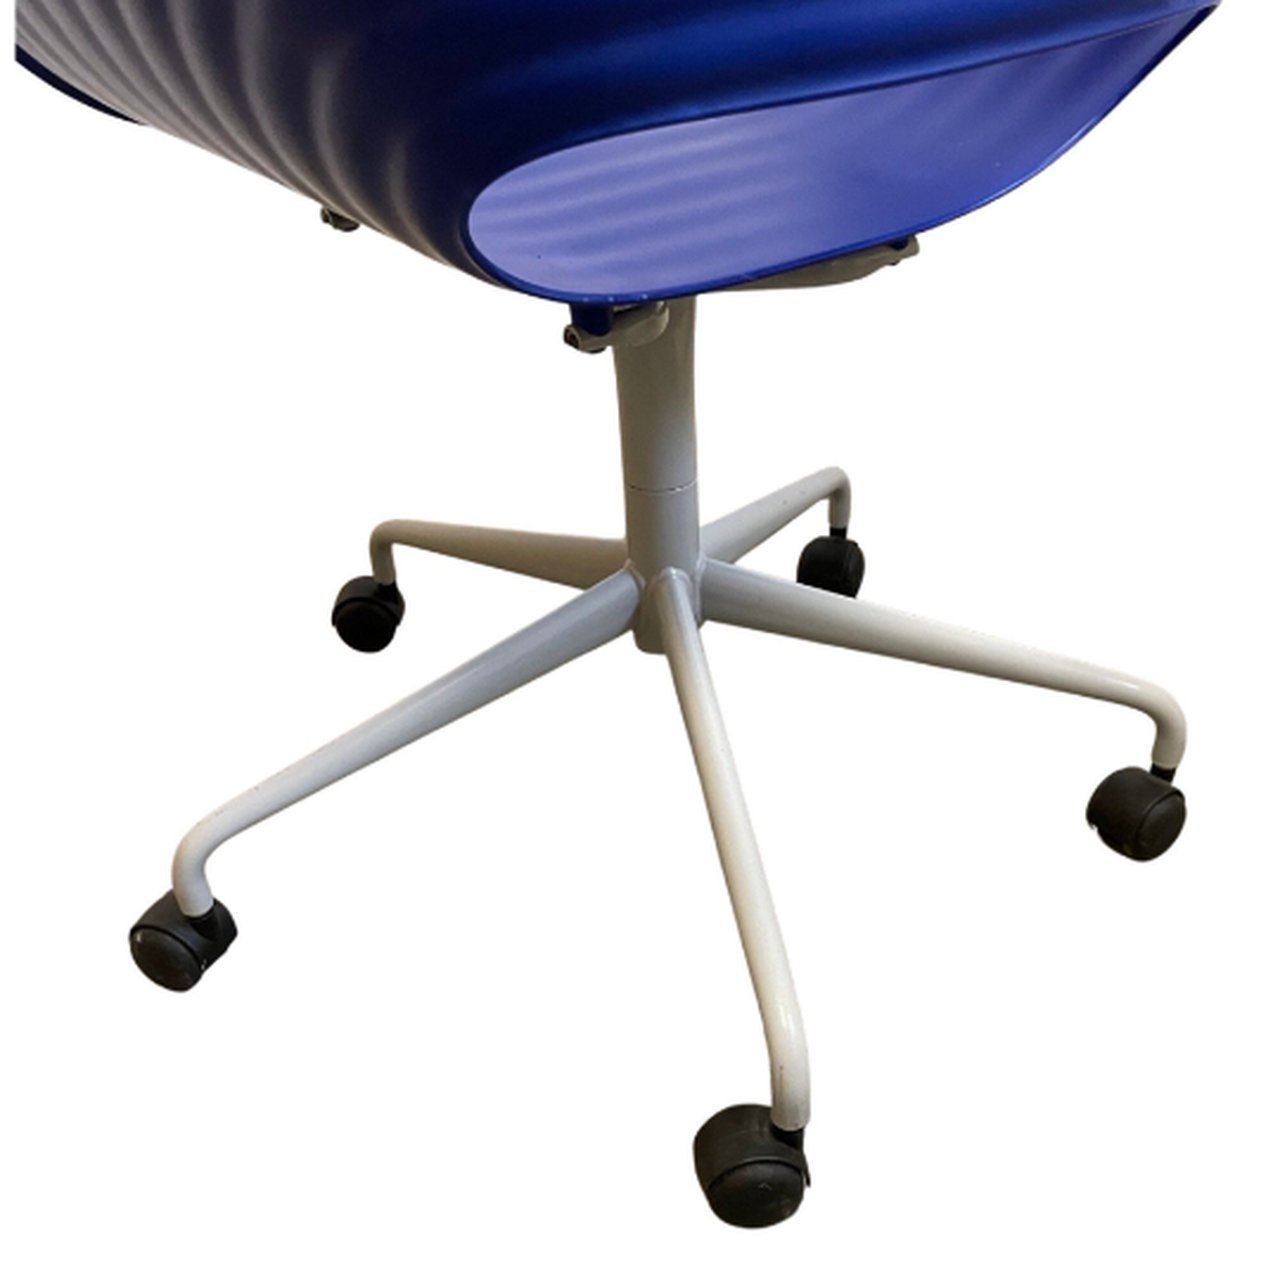 Image 2 of Vitra - Ron Arad - swivel chair / office chair - model Tom Vac - Blue seat